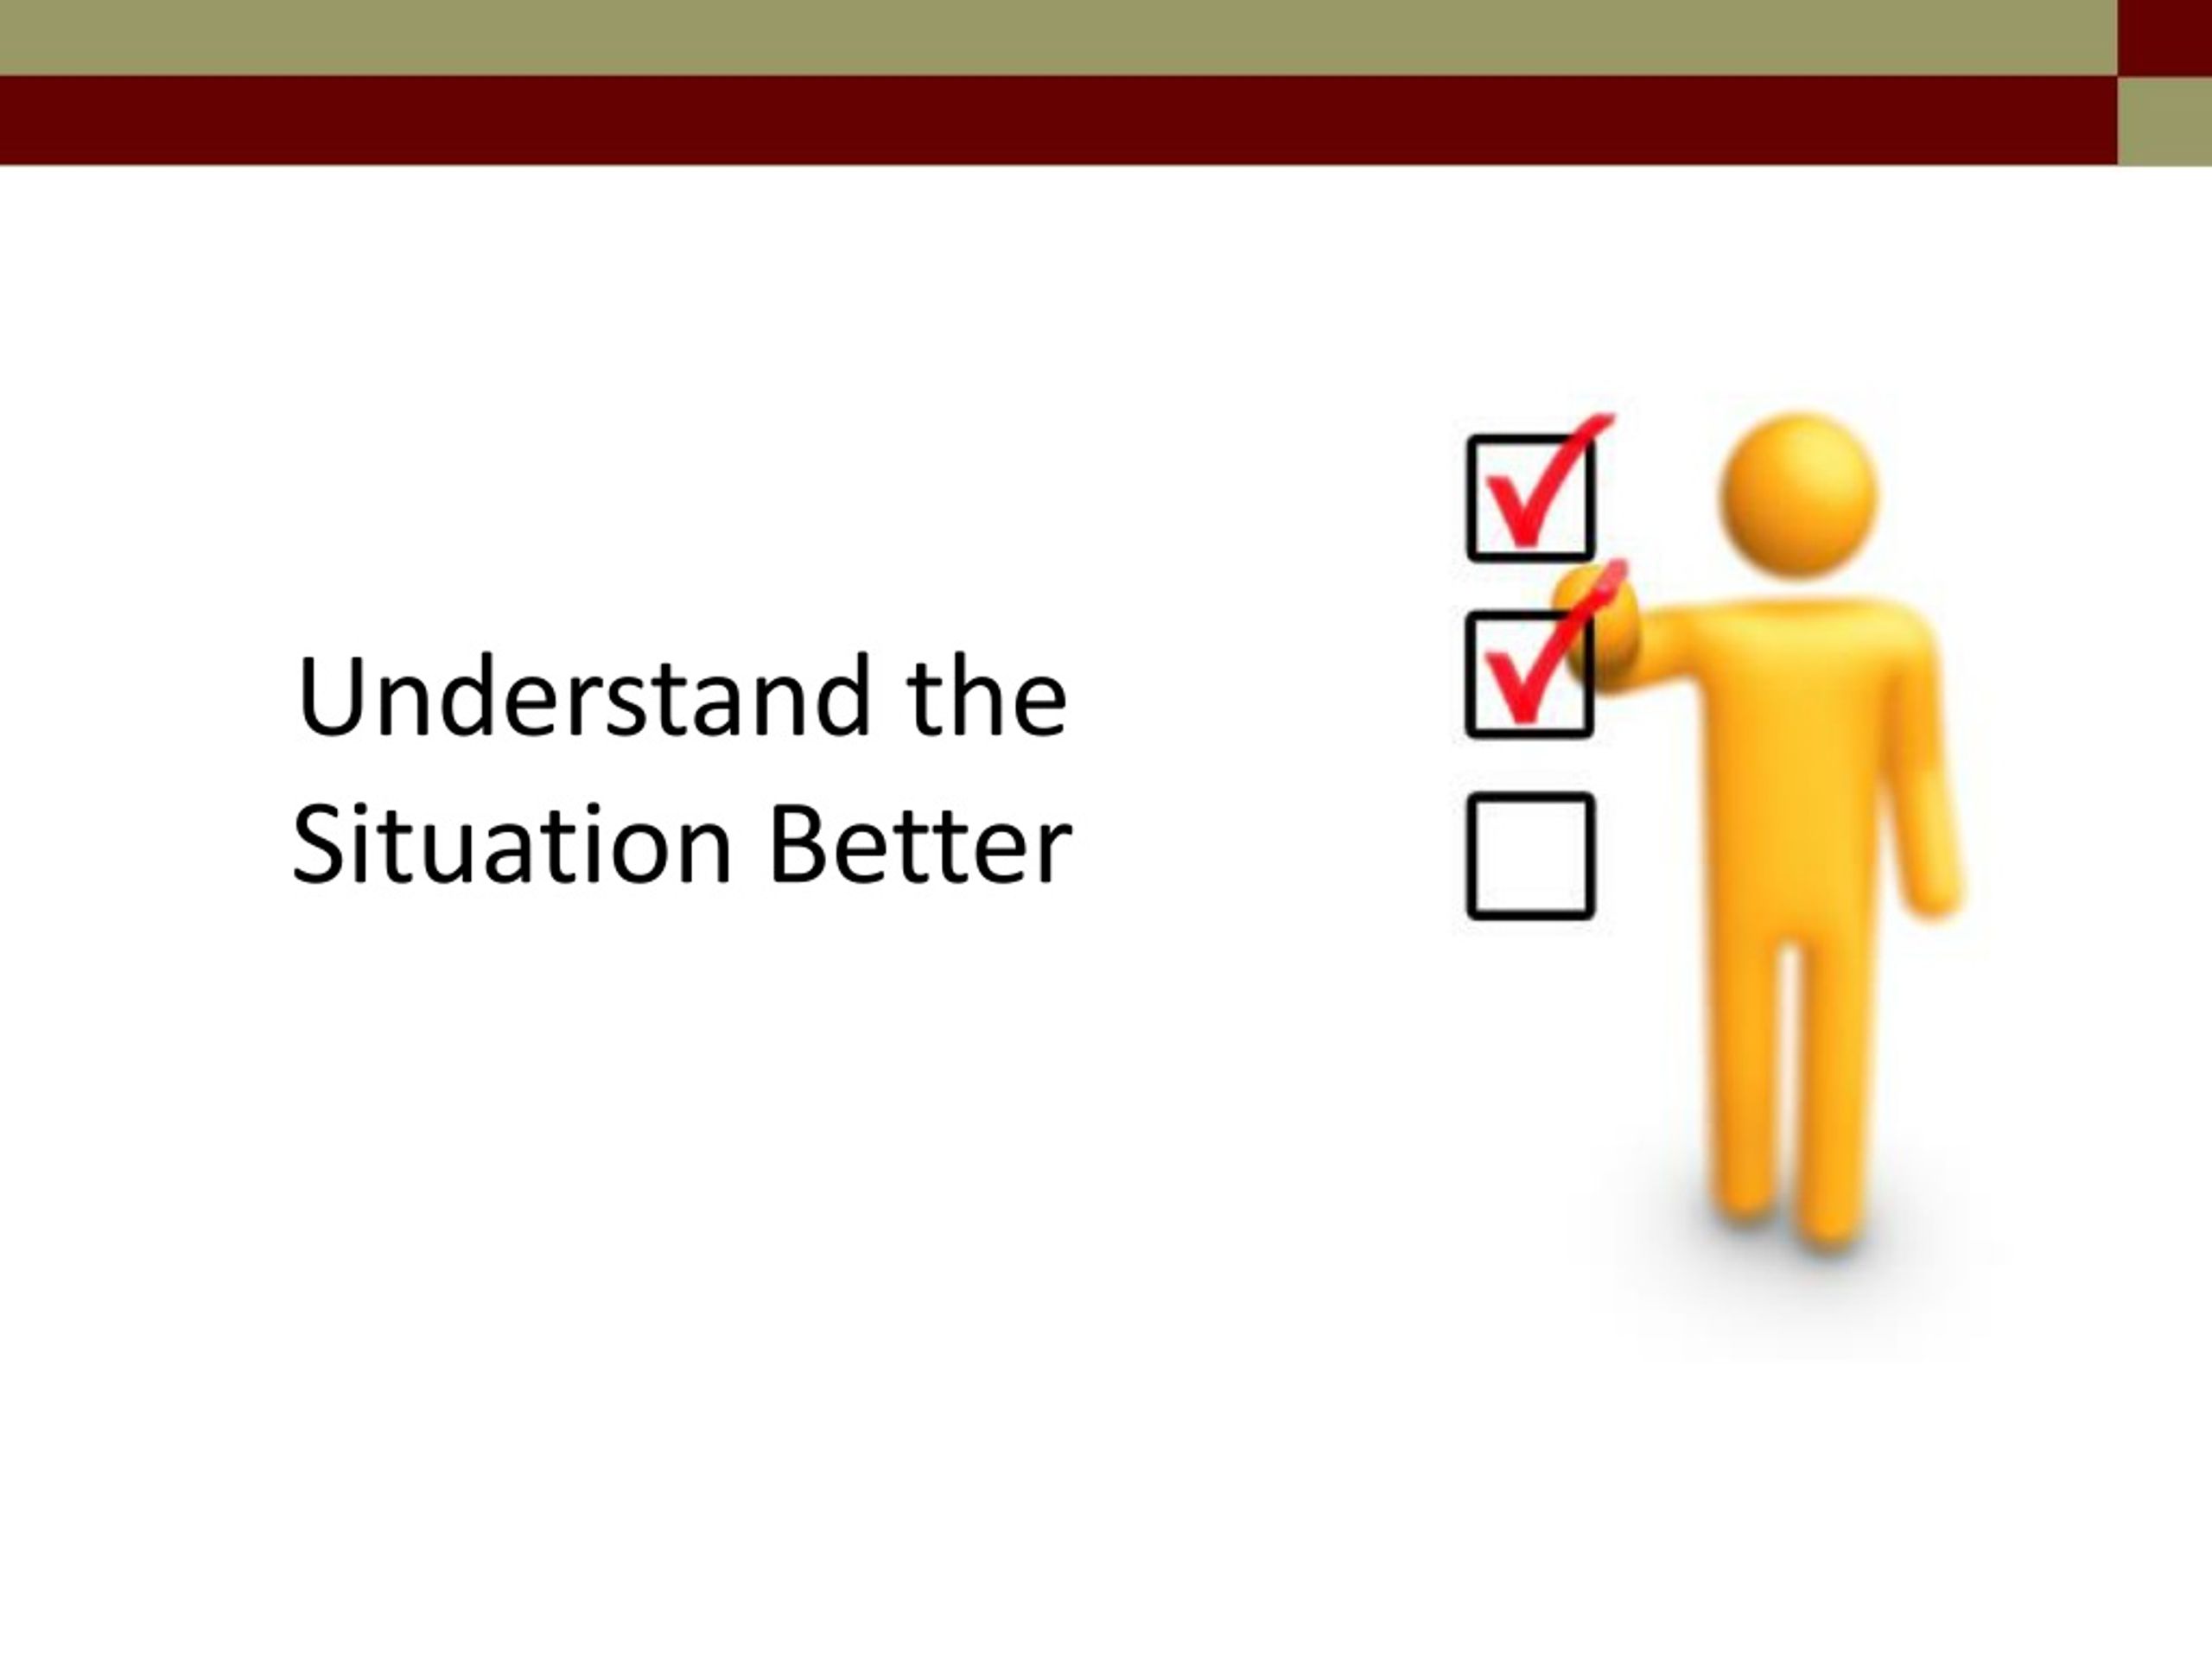 PPT - Empathic Listening PowerPoint Presentation, free download - ID:6200151